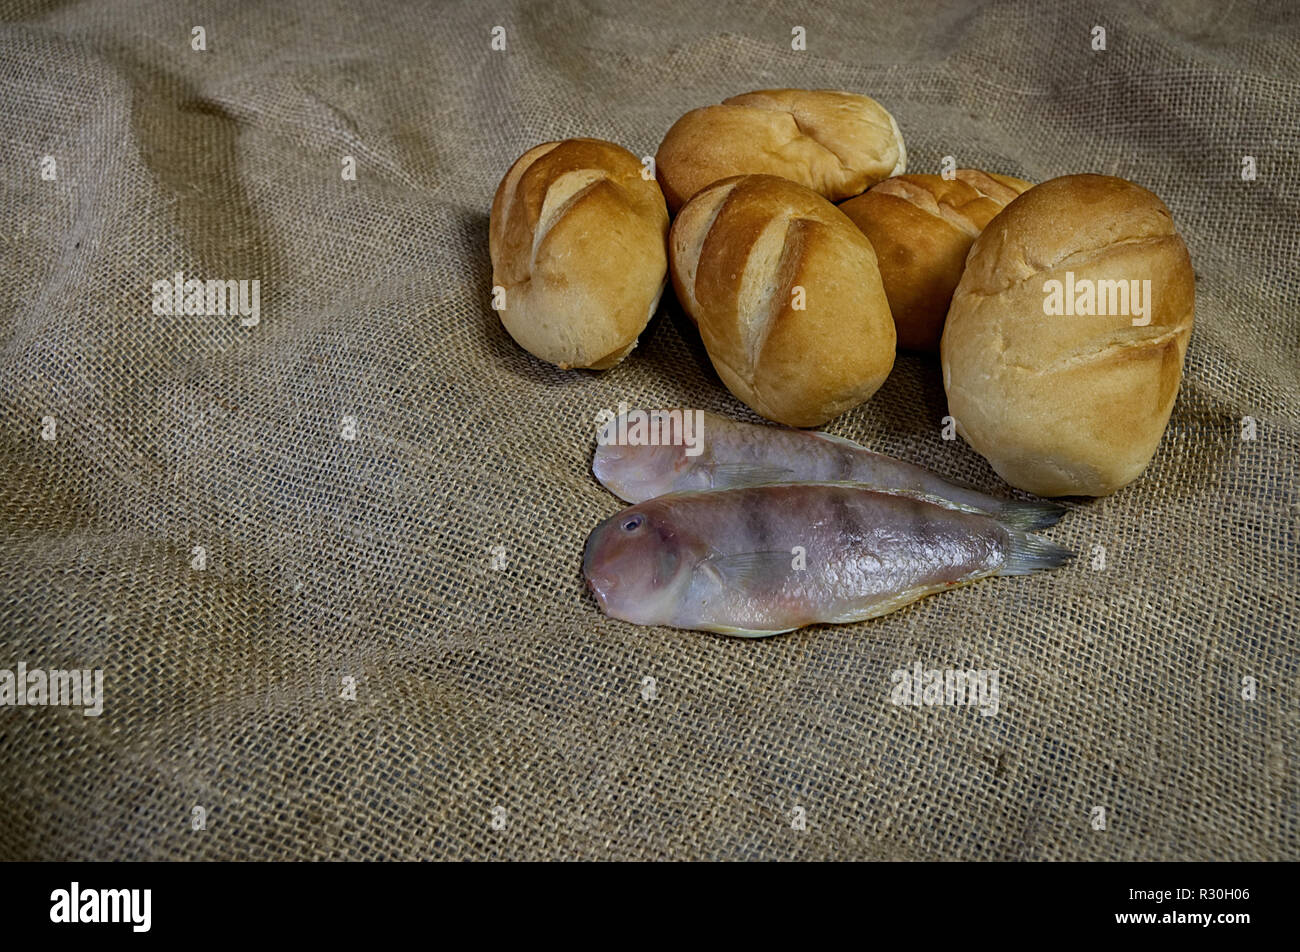 2 fish and 5 loaves Stock Photo